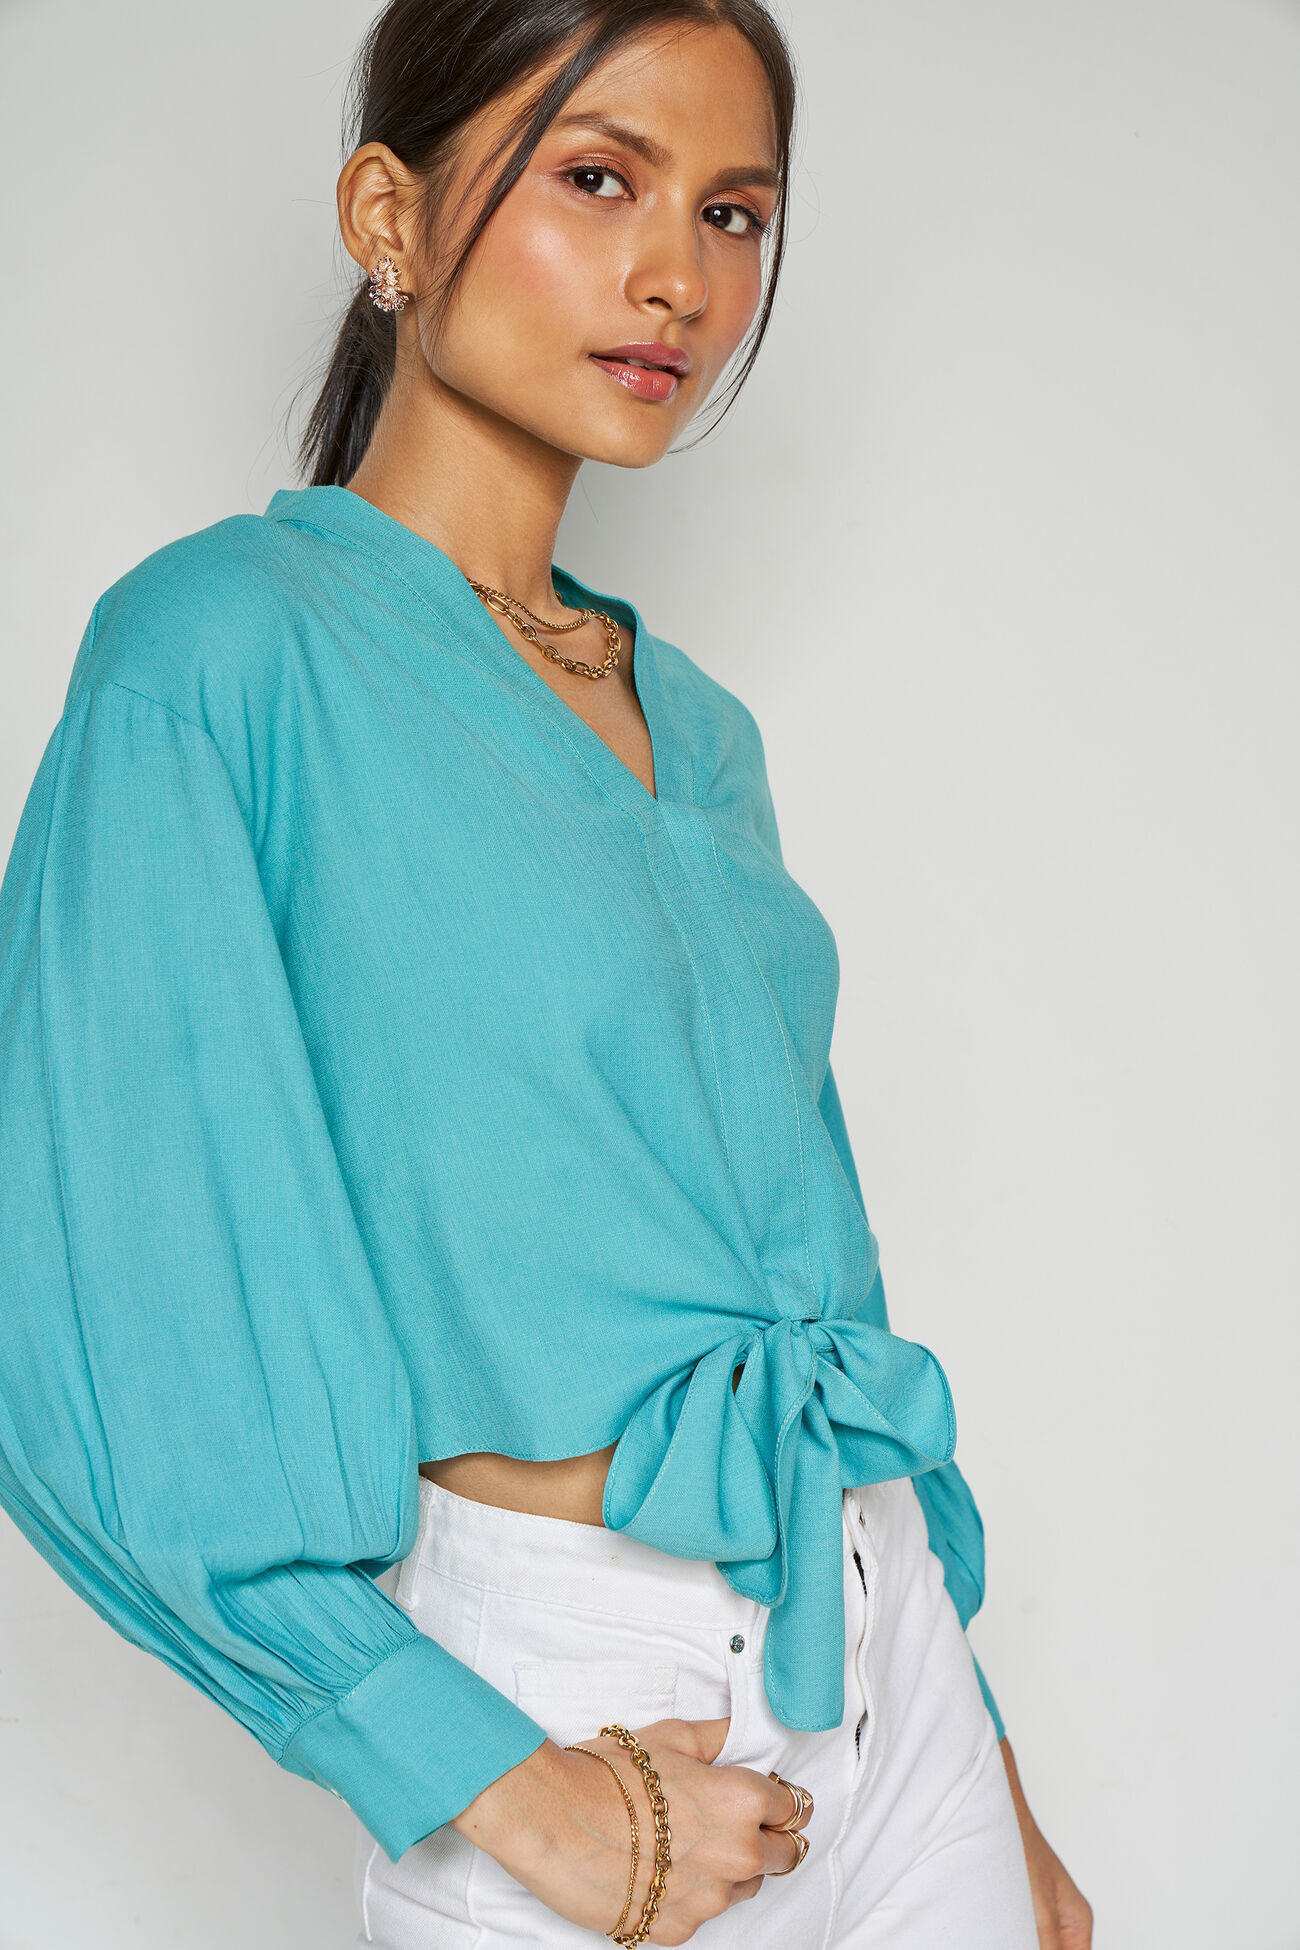 Power Hour Top, Turquoise, image 1